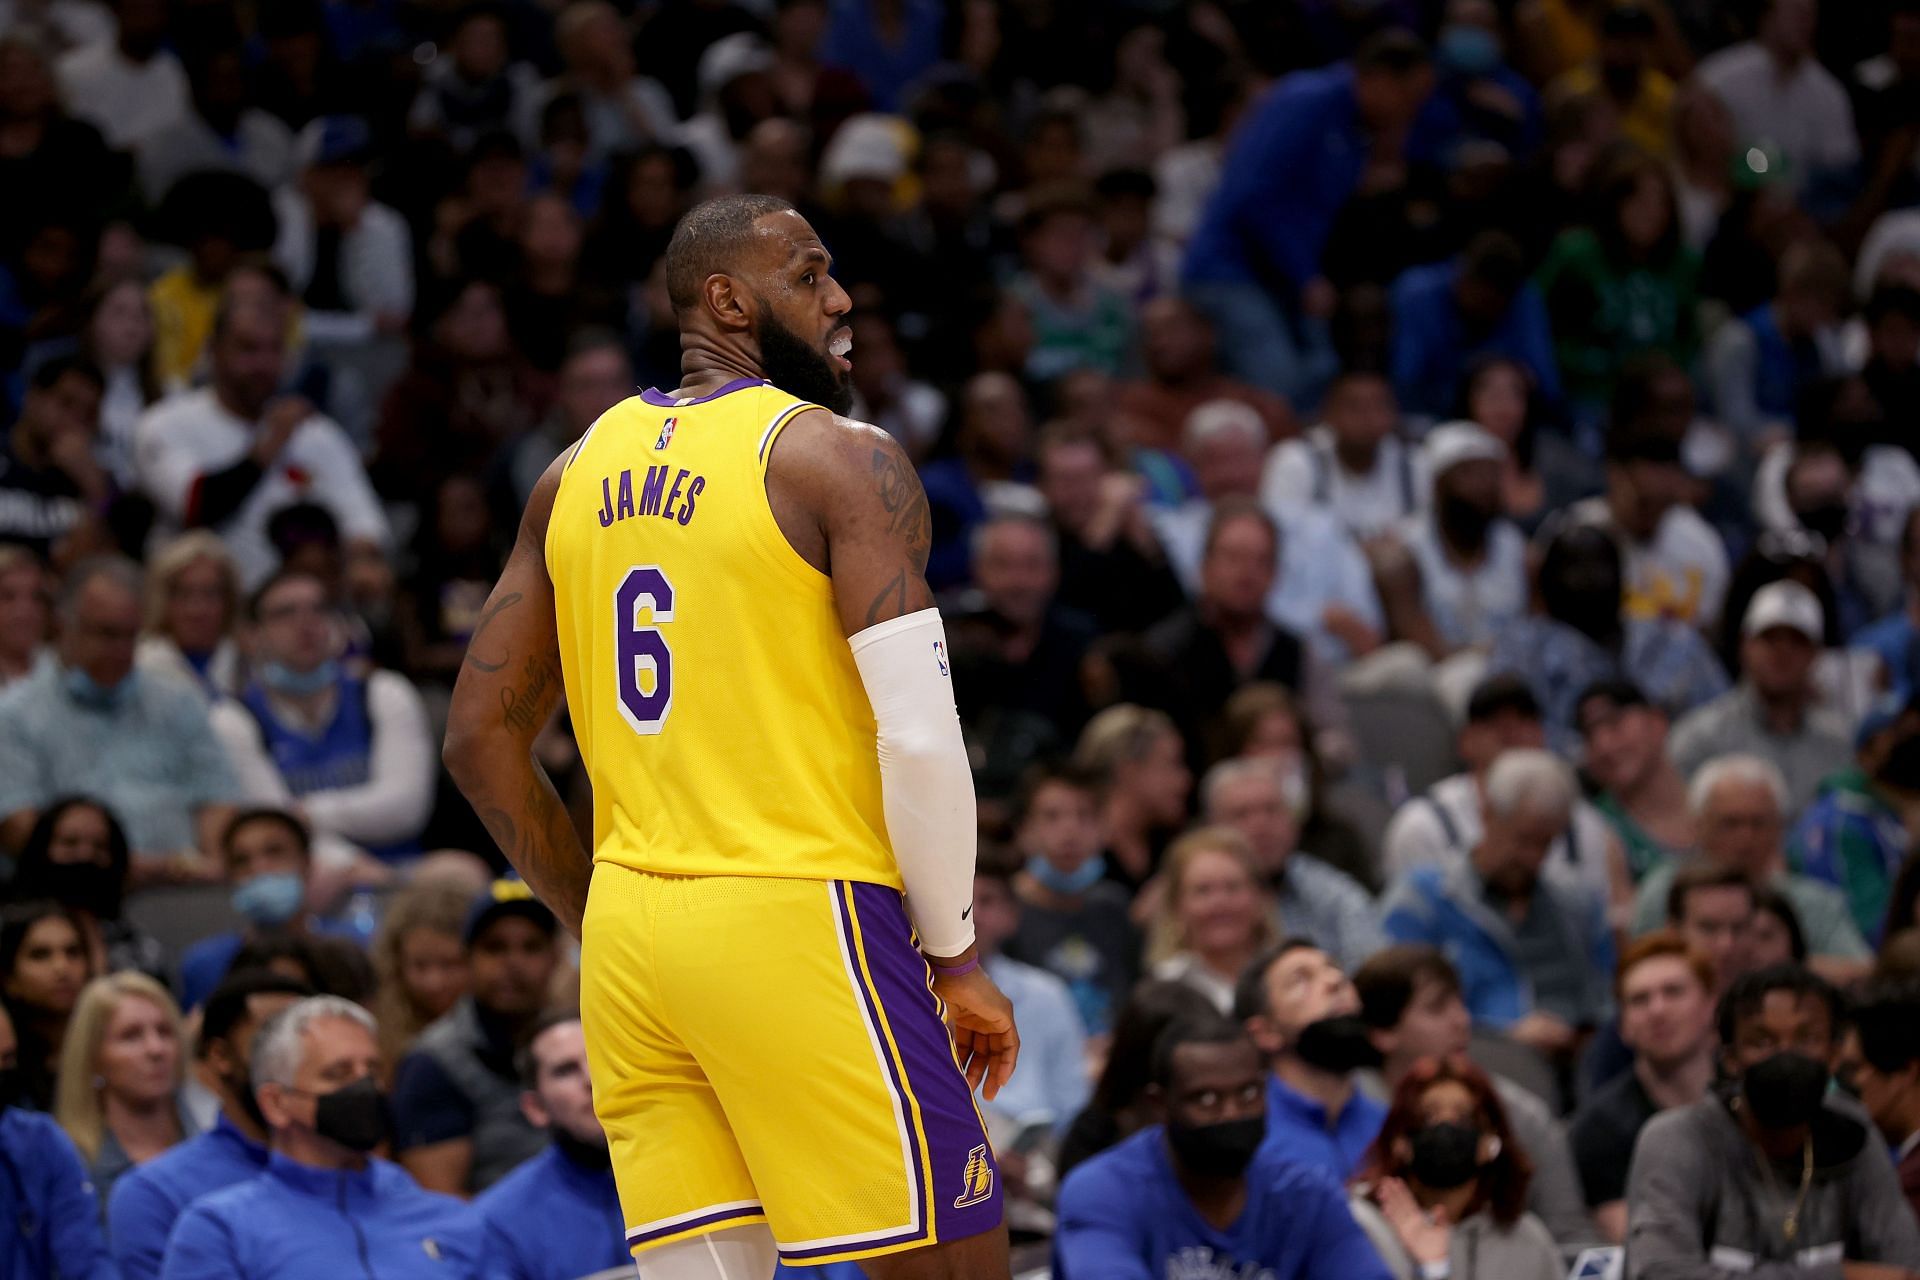 Los Angeles Lakers will need their star LeBron James to appear again